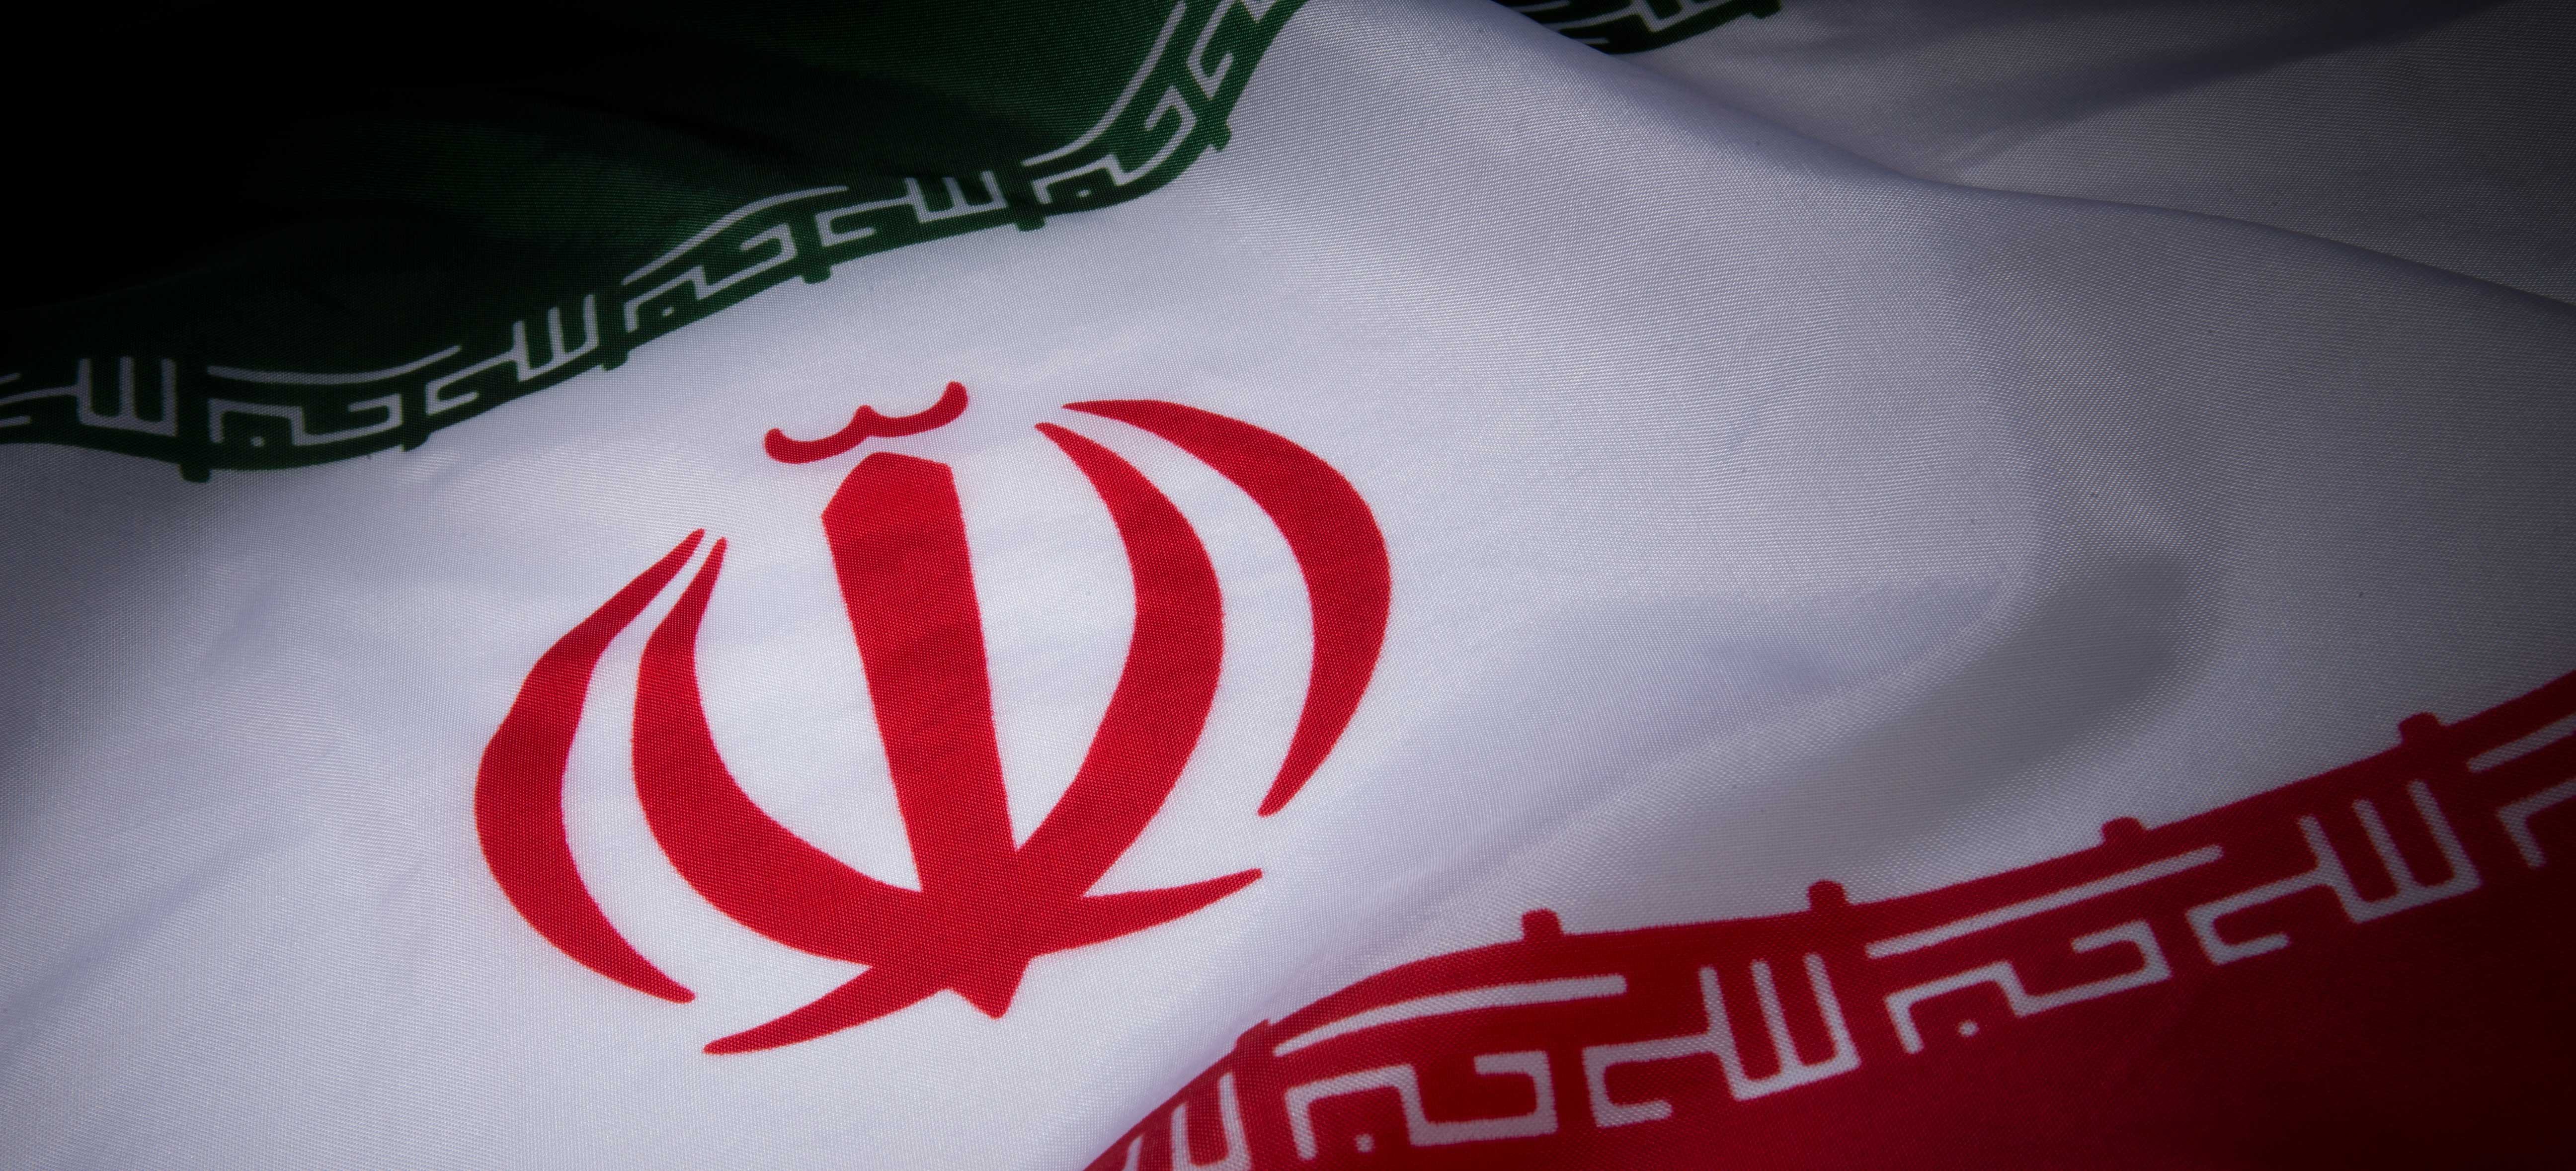 Government of Iran Is Preparing to Adopt Bitcoin for Use Inside the Country